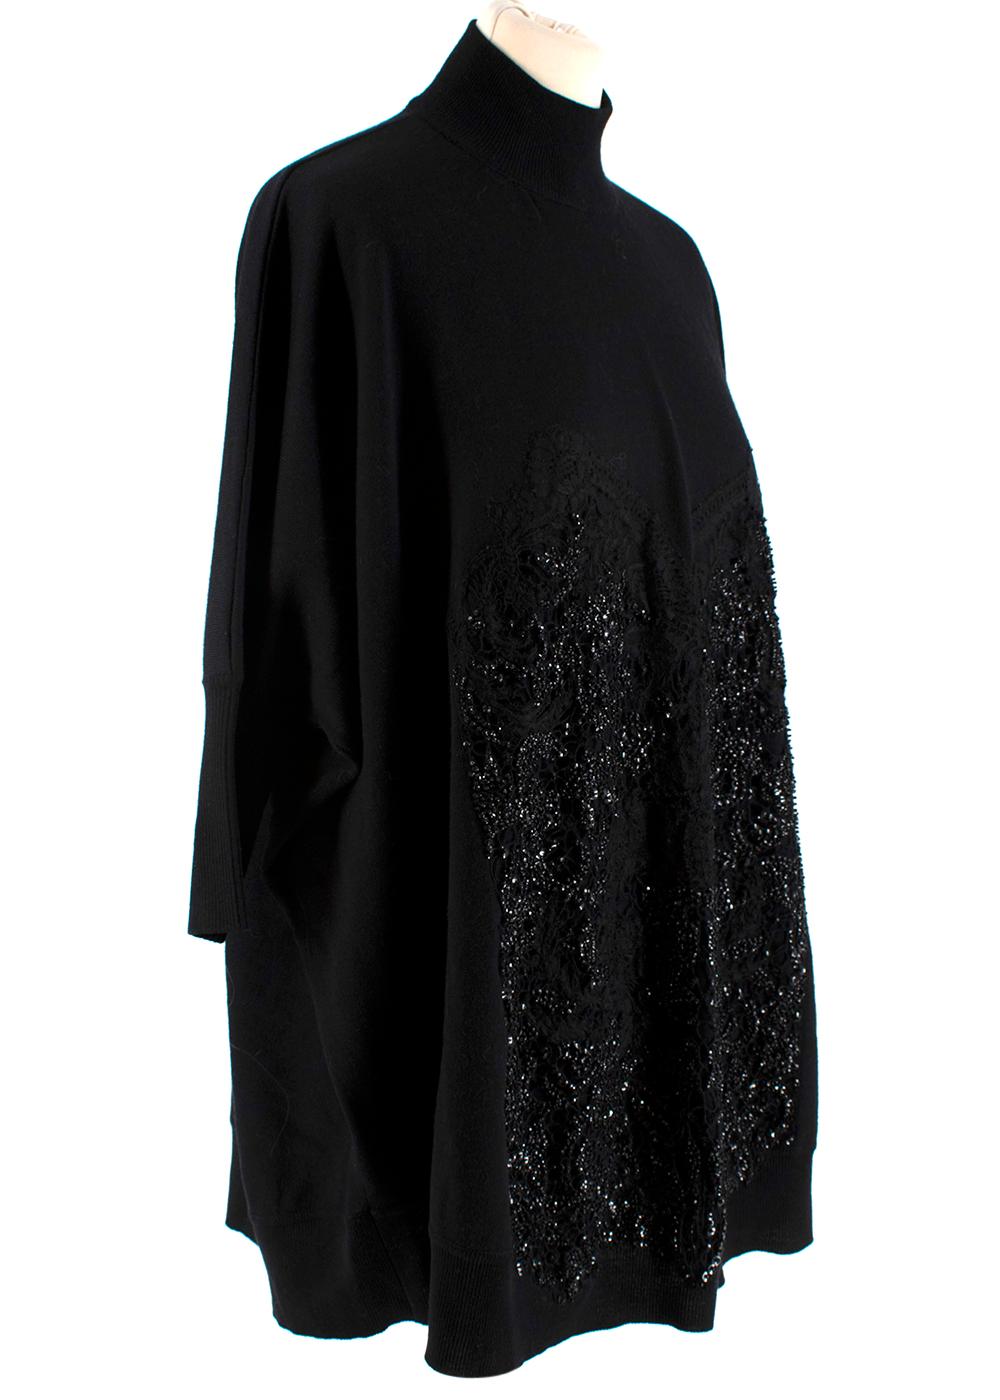 Givenchy Black Wool Beaded Bustier Oversized Knit Sweater

- Made of soft lightweight wool 
- Beaded lace bustier like motif to the front 
- Oversized cut 
- Ribbed cuffs and hem 
- Raised neck 
- Neutral, easy to style black hue 
- Versatile